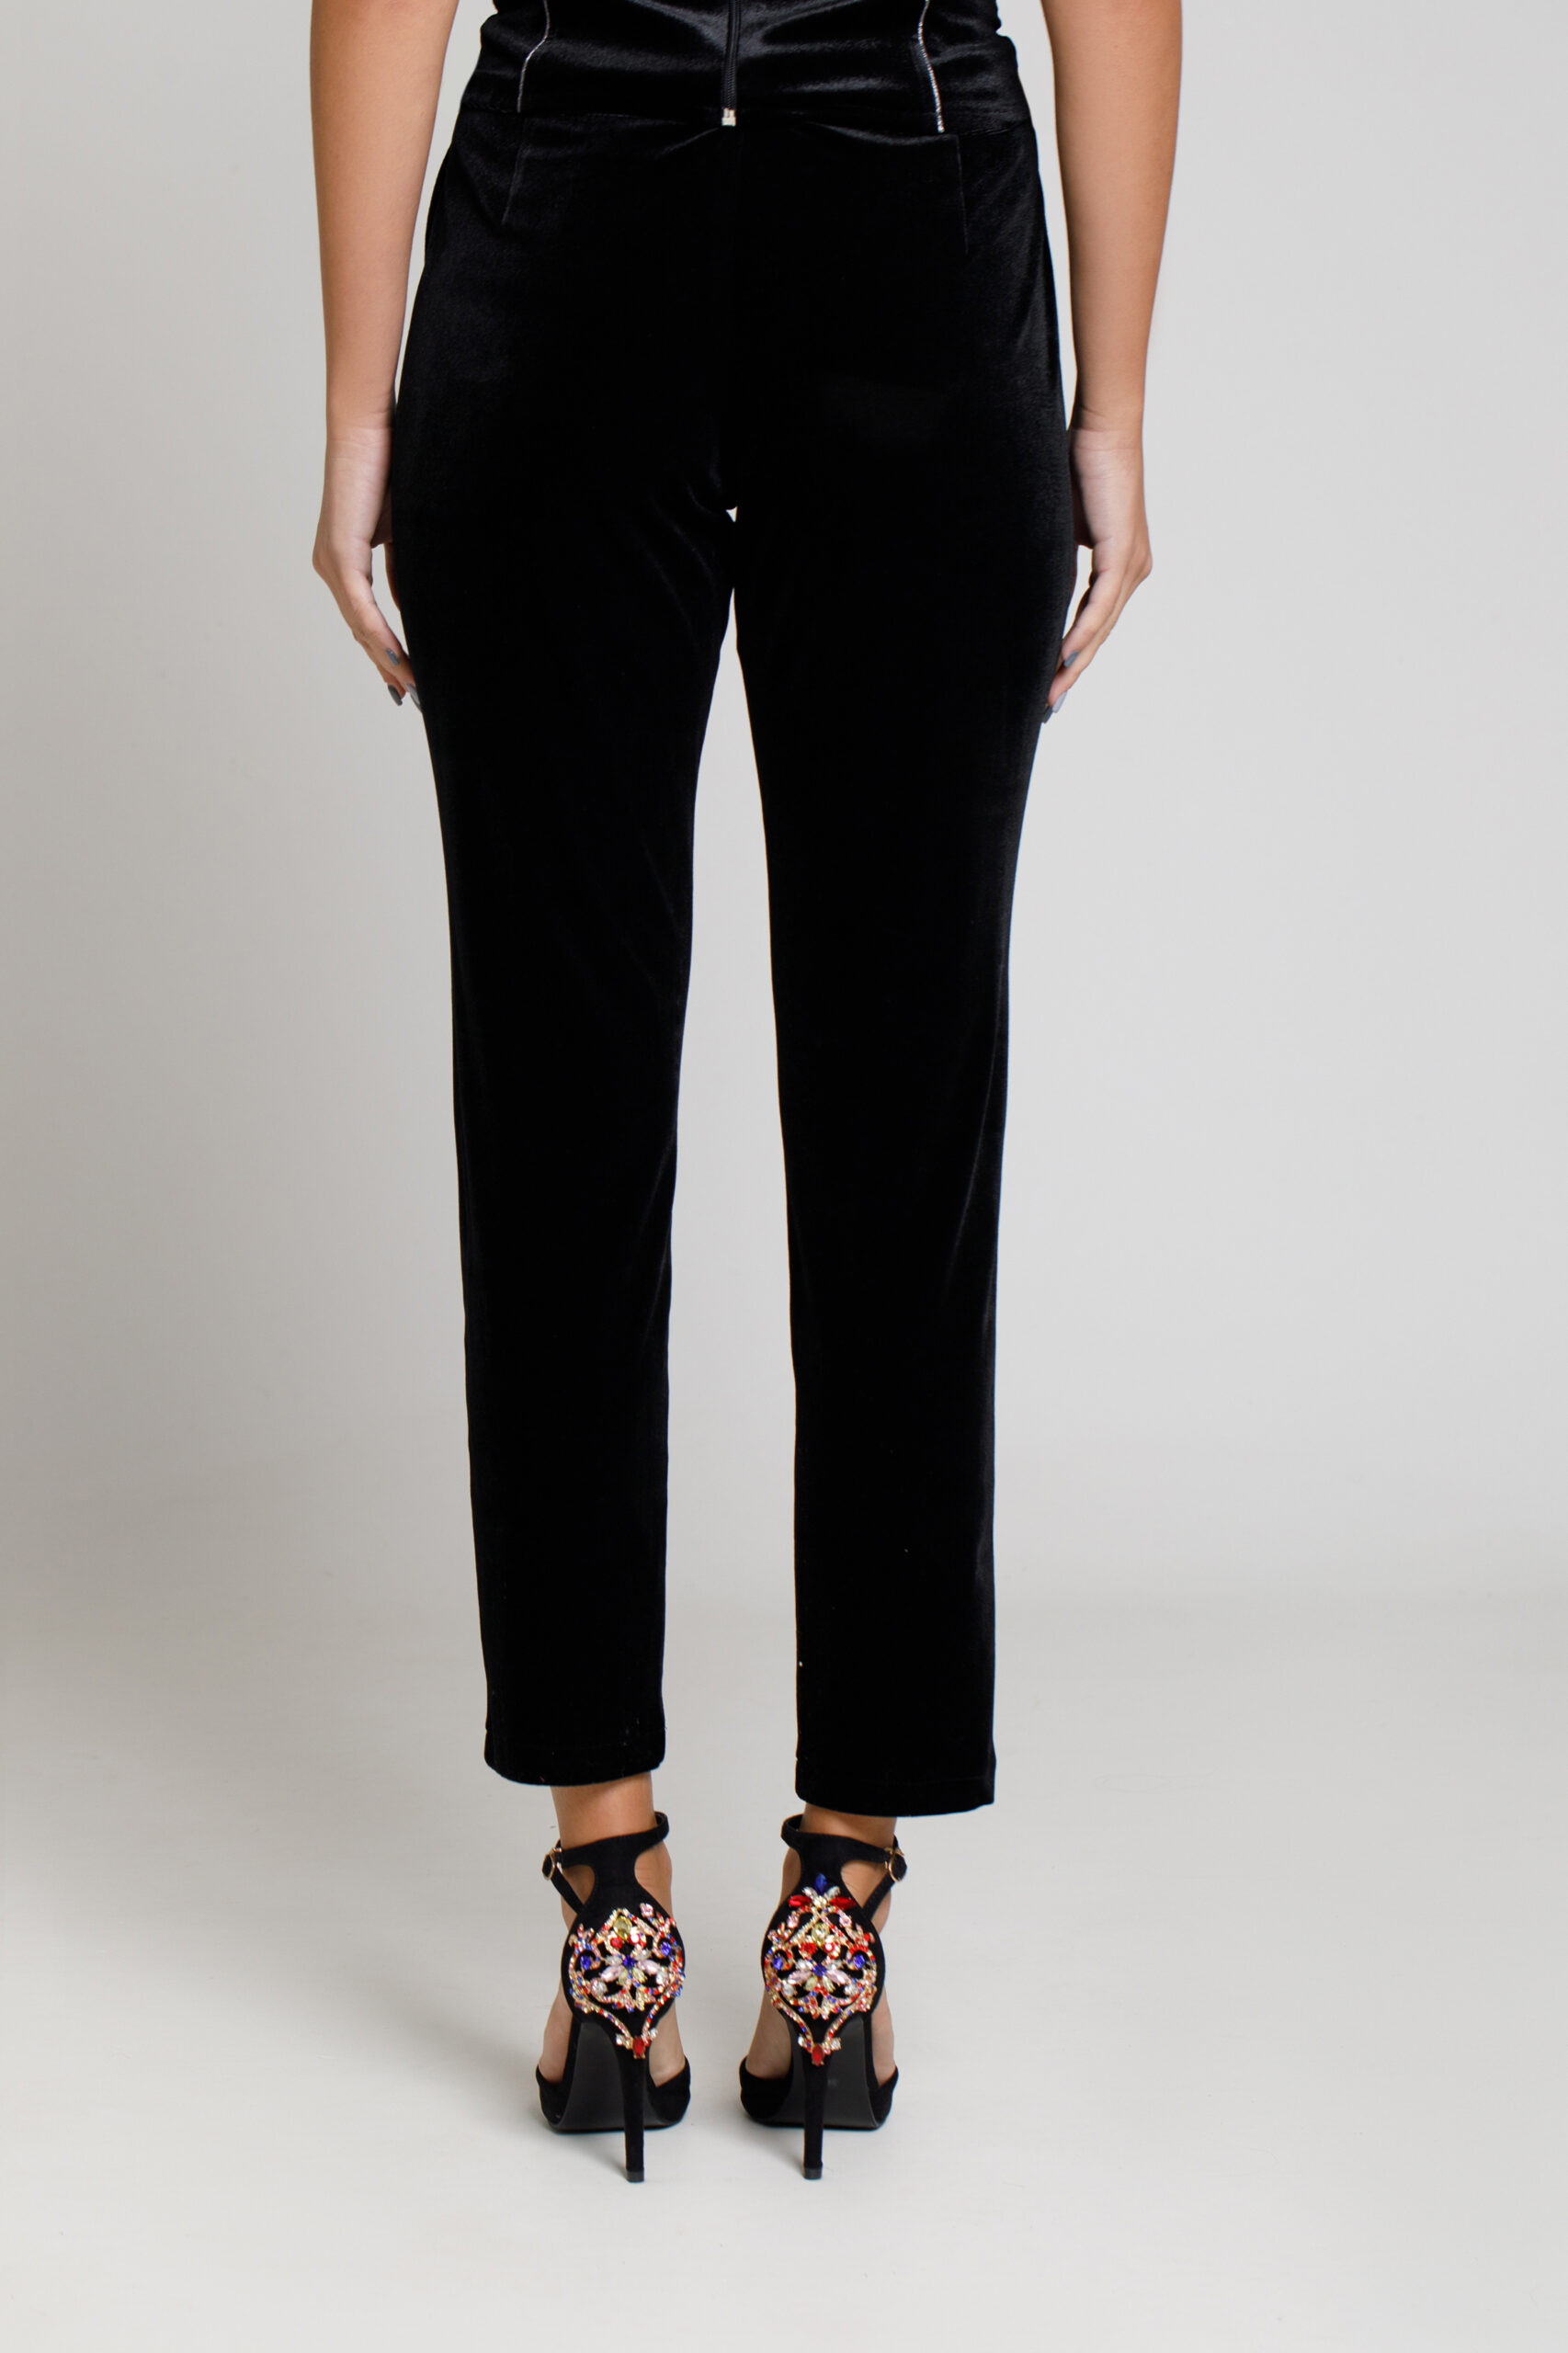 LUBA pants in black velvet with lace. Natural fabrics, original design, handmade embroidery